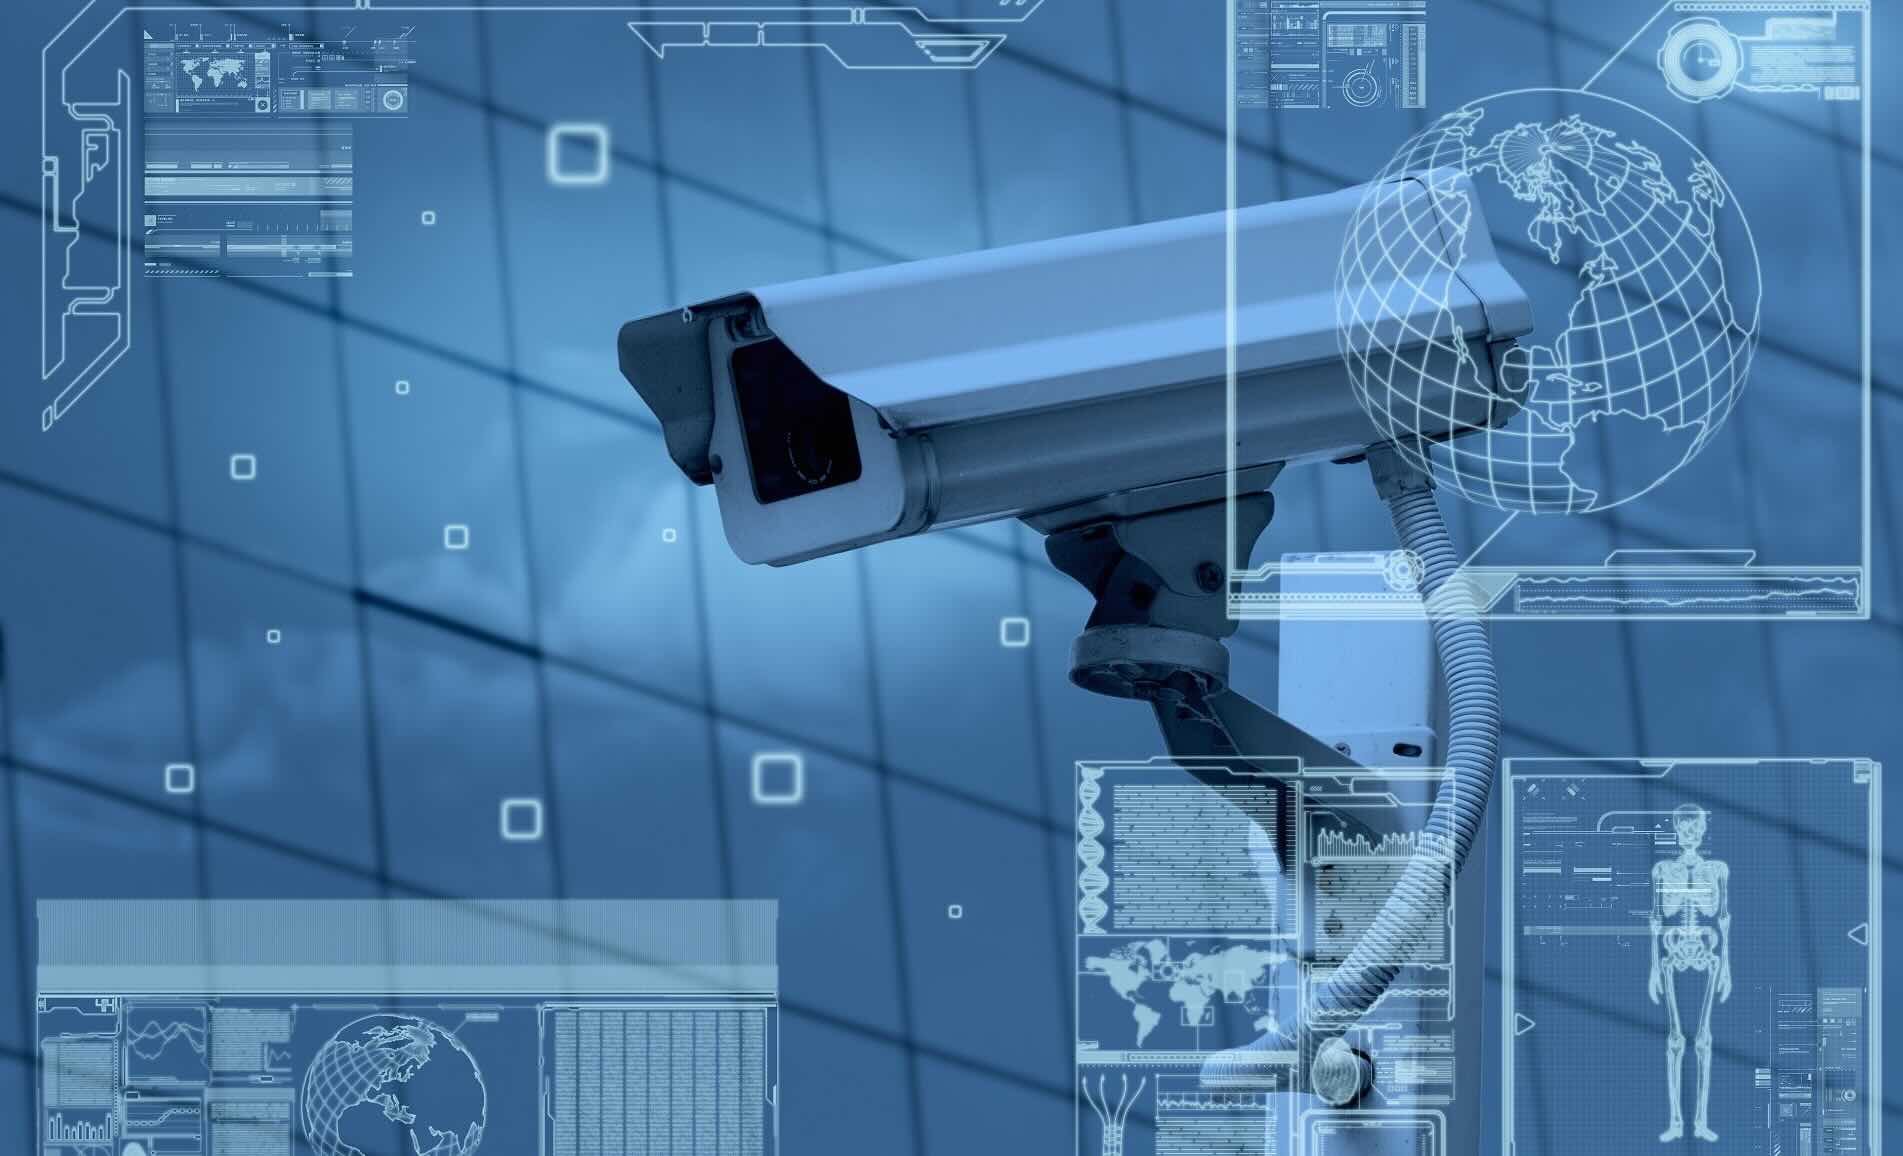 What Can Be Used To Evade Intrusion Detection Systems (IDS)?